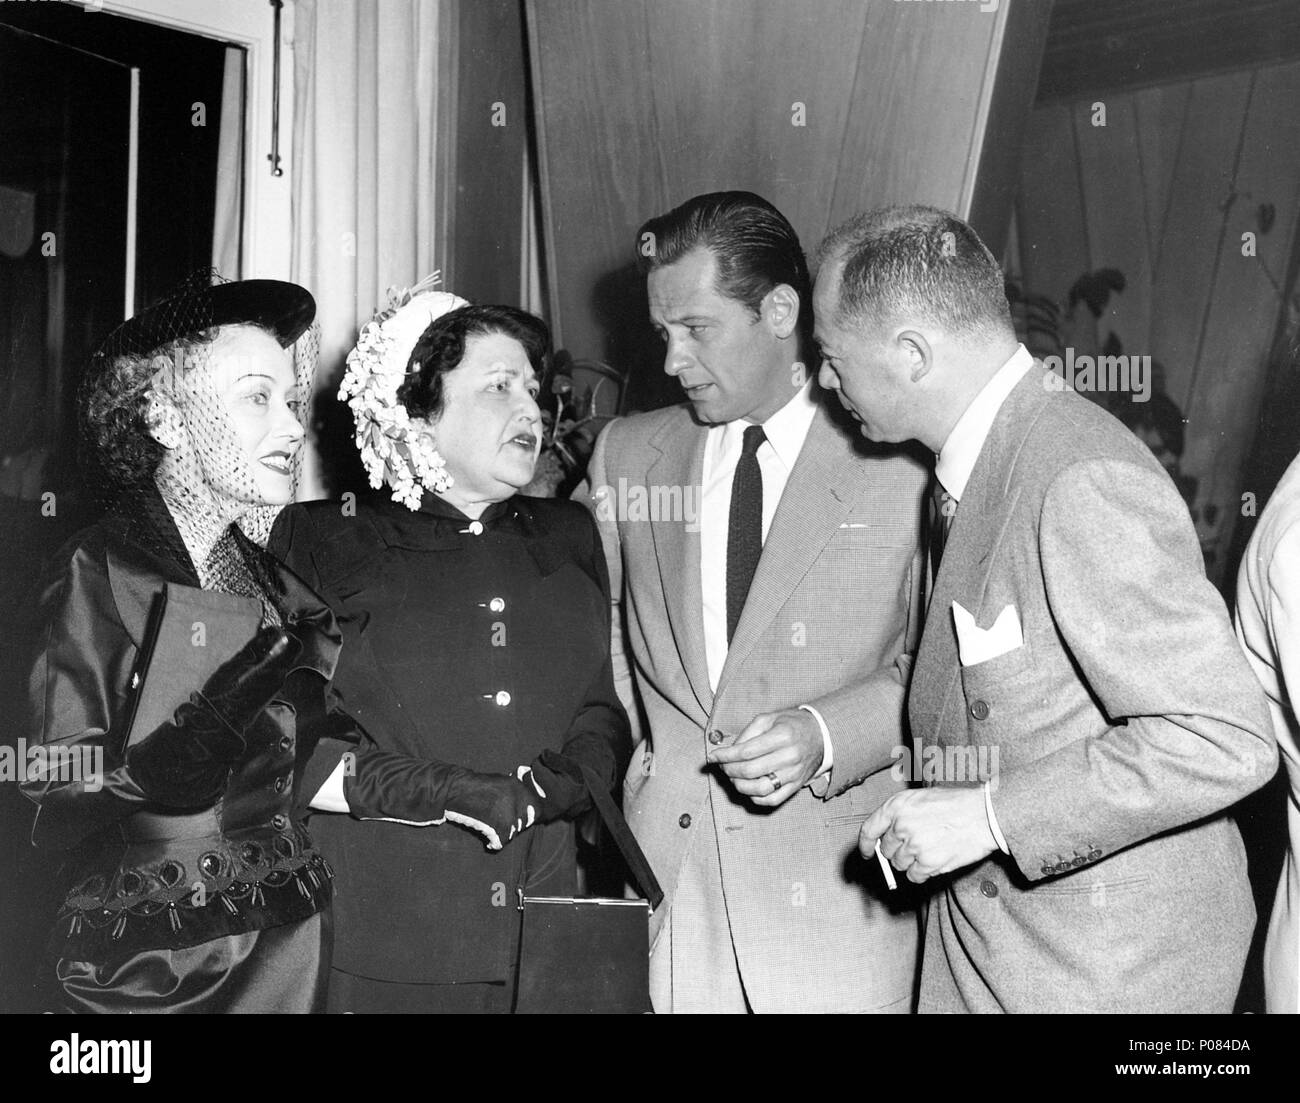 Description: Louella Parsons with Gloria Swanson, William Holden and Billy Wilder during the rest of 'Sunset Boulevard'.  Original Film Title: SUNSET BLVD..  English Title: SUNSET BLVD..  Film Director: BILLY WILDER.  Year: 1950.  Stars: GLORIA SWANSON; WILLIAM HOLDEN; BILLY WILDER; LOUELLA PARSONS. Credit: PARAMOUNT PICTURES / Album Stock Photo